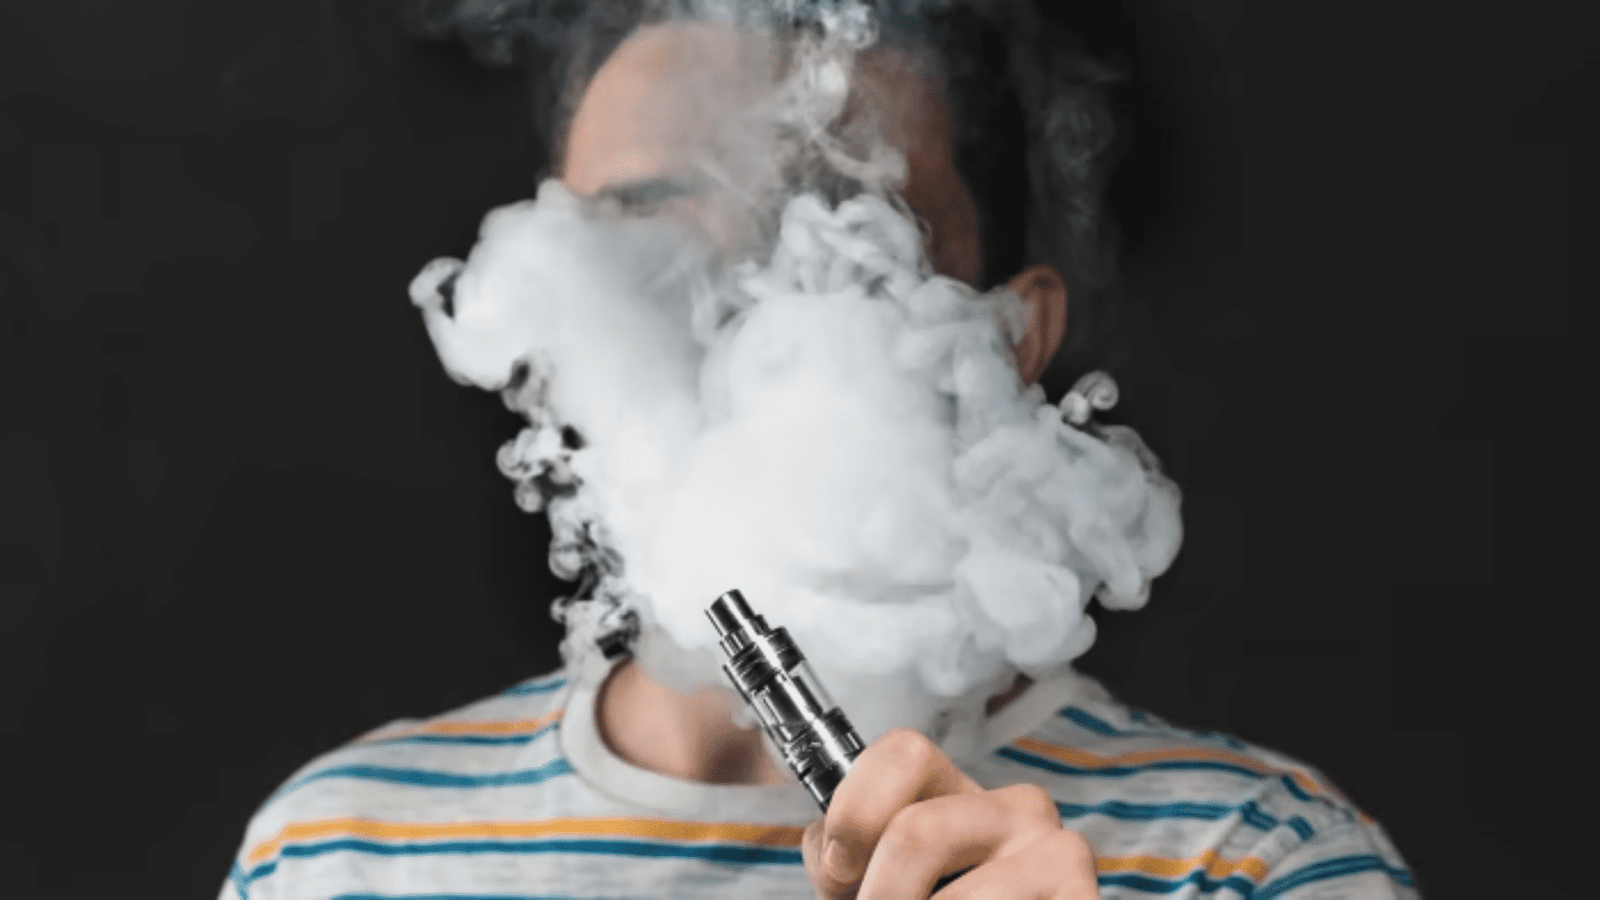 Ex-smokers who vape face higher lung cancer risk